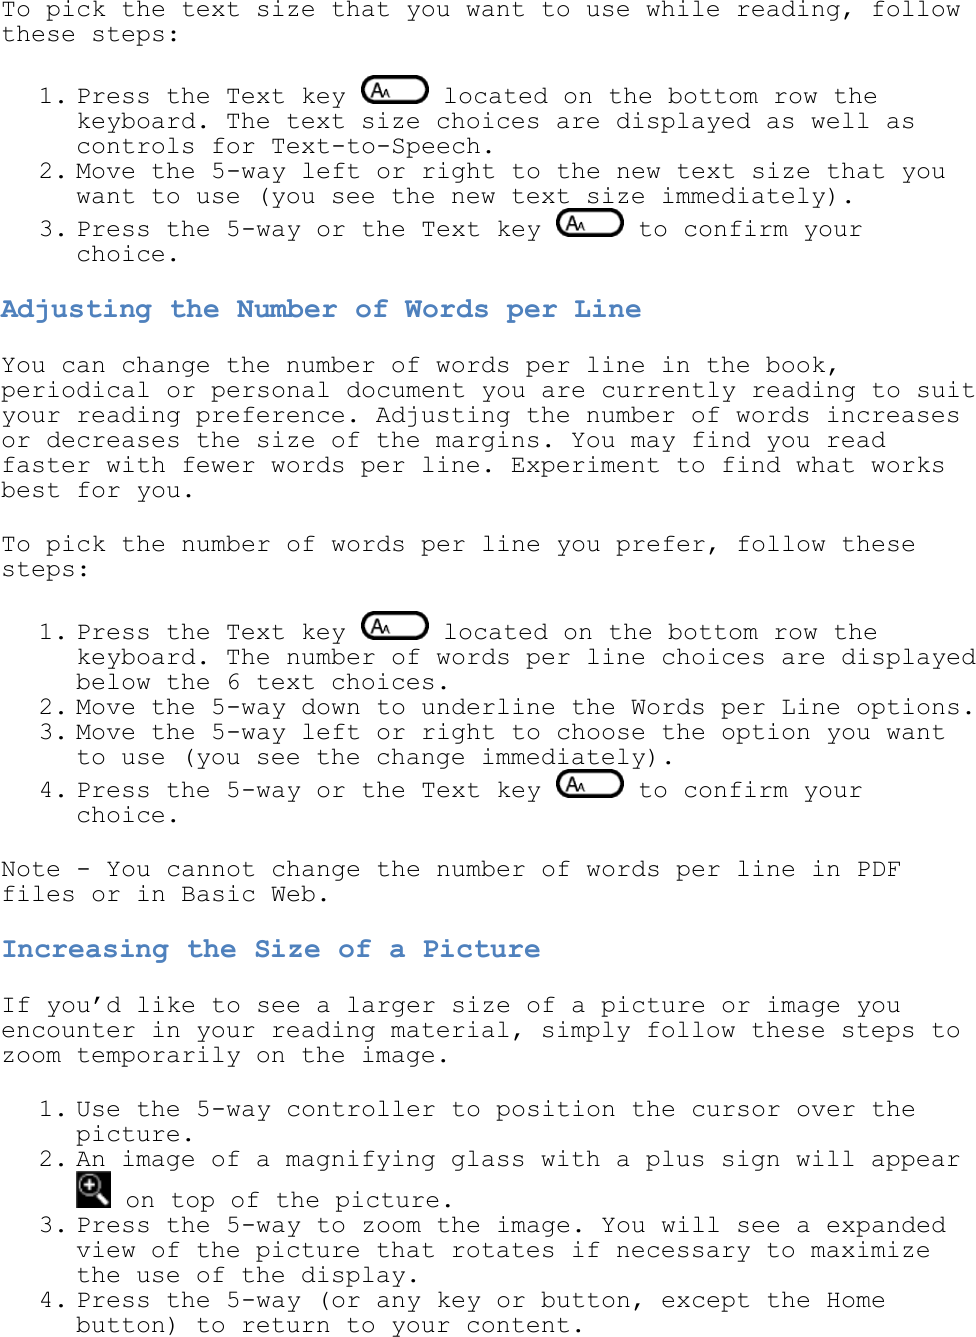   To pick the text size that you want to use while reading, follow these steps: 1. Press the Text key   located on the bottom row the keyboard. The text size choices are displayed as well as controls for Text-to-Speech.  2. Move the 5-way left or right to the new text size that you want to use (you see the new text size immediately).  3. Press the 5-way or the Text key   to confirm your choice.  Adjusting the Number of Words per Line You can change the number of words per line in the book, periodical or personal document you are currently reading to suit your reading preference. Adjusting the number of words increases or decreases the size of the margins. You may find you read faster with fewer words per line. Experiment to find what works best for you.  To pick the number of words per line you prefer, follow these steps: 1. Press the Text key   located on the bottom row the keyboard. The number of words per line choices are displayed below the 6 text choices. 2. Move the 5-way down to underline the Words per Line options.  3. Move the 5-way left or right to choose the option you want to use (you see the change immediately). 4. Press the 5-way or the Text key   to confirm your choice.  Note - You cannot change the number of words per line in PDF files or in Basic Web. Increasing the Size of a Picture If you’d like to see a larger size of a picture or image you encounter in your reading material, simply follow these steps to zoom temporarily on the image. 1. Use the 5-way controller to position the cursor over the picture.  2. An image of a magnifying glass with a plus sign will appear  on top of the picture.  3. Press the 5-way to zoom the image. You will see a expanded view of the picture that rotates if necessary to maximize the use of the display.  4. Press the 5-way (or any key or button, except the Home button) to return to your content.  